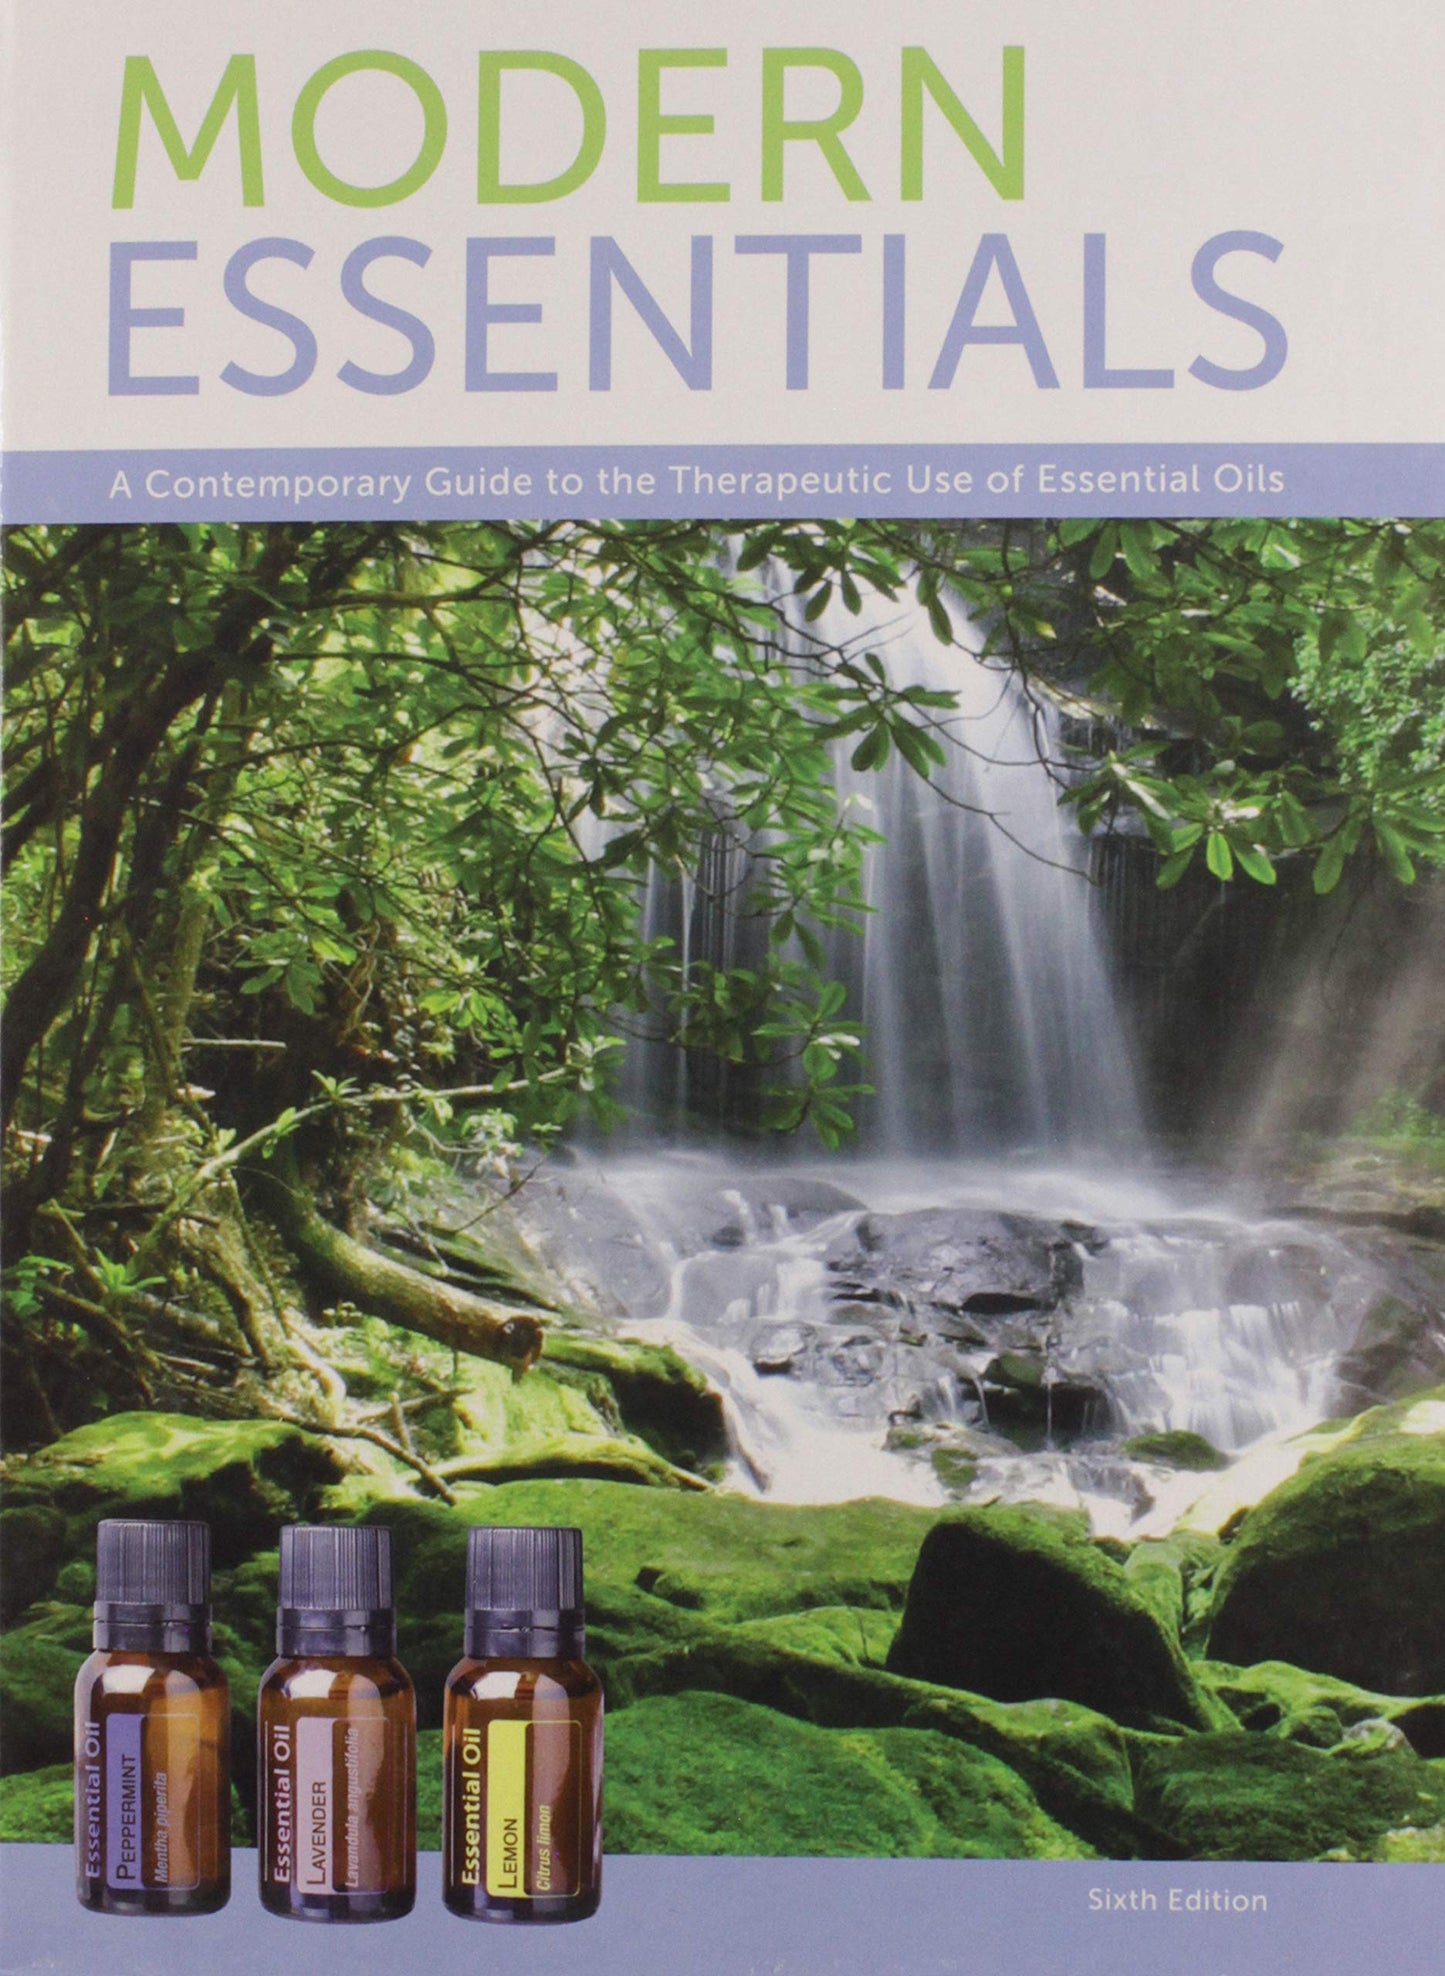 Modern Essentials - Contemporary Guide to the Therapeutic Use of Essential Oils; Sixth Edition - Dead Tree Dreams Bookstore